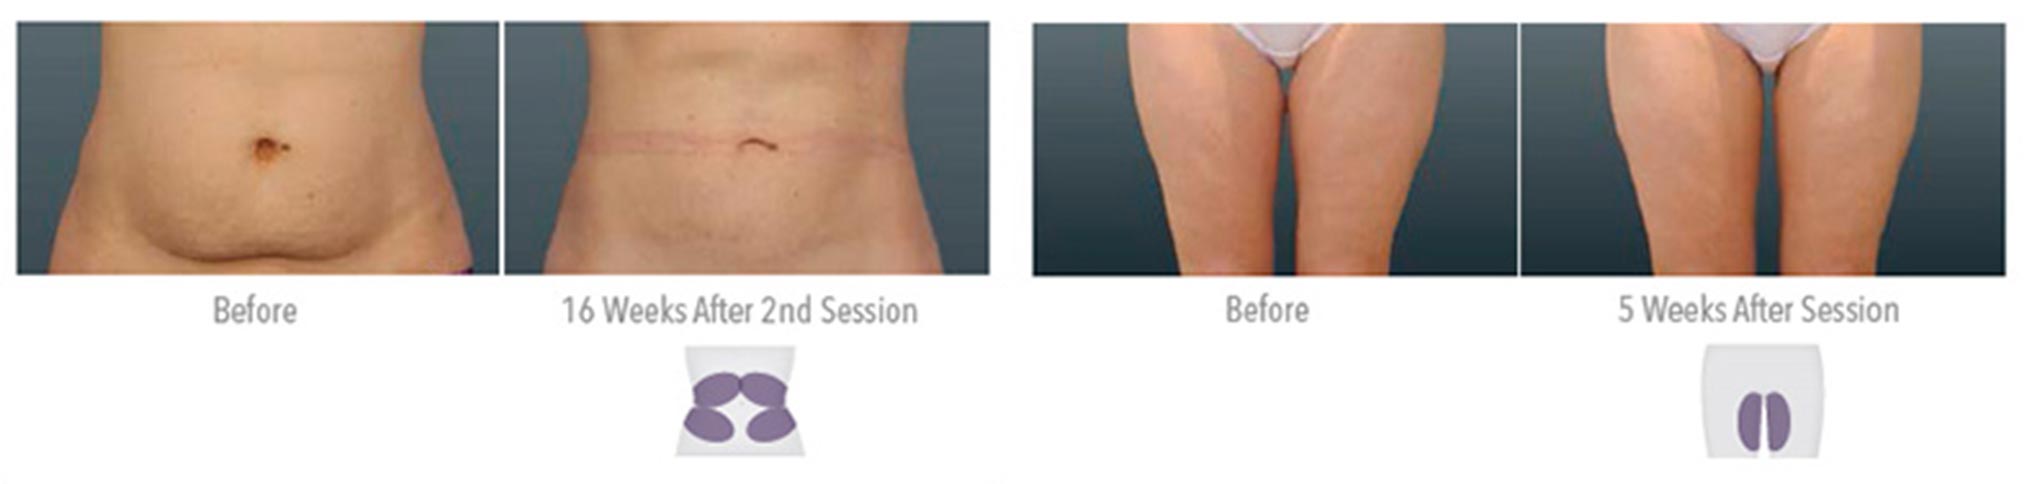 CoolSculpting recovery